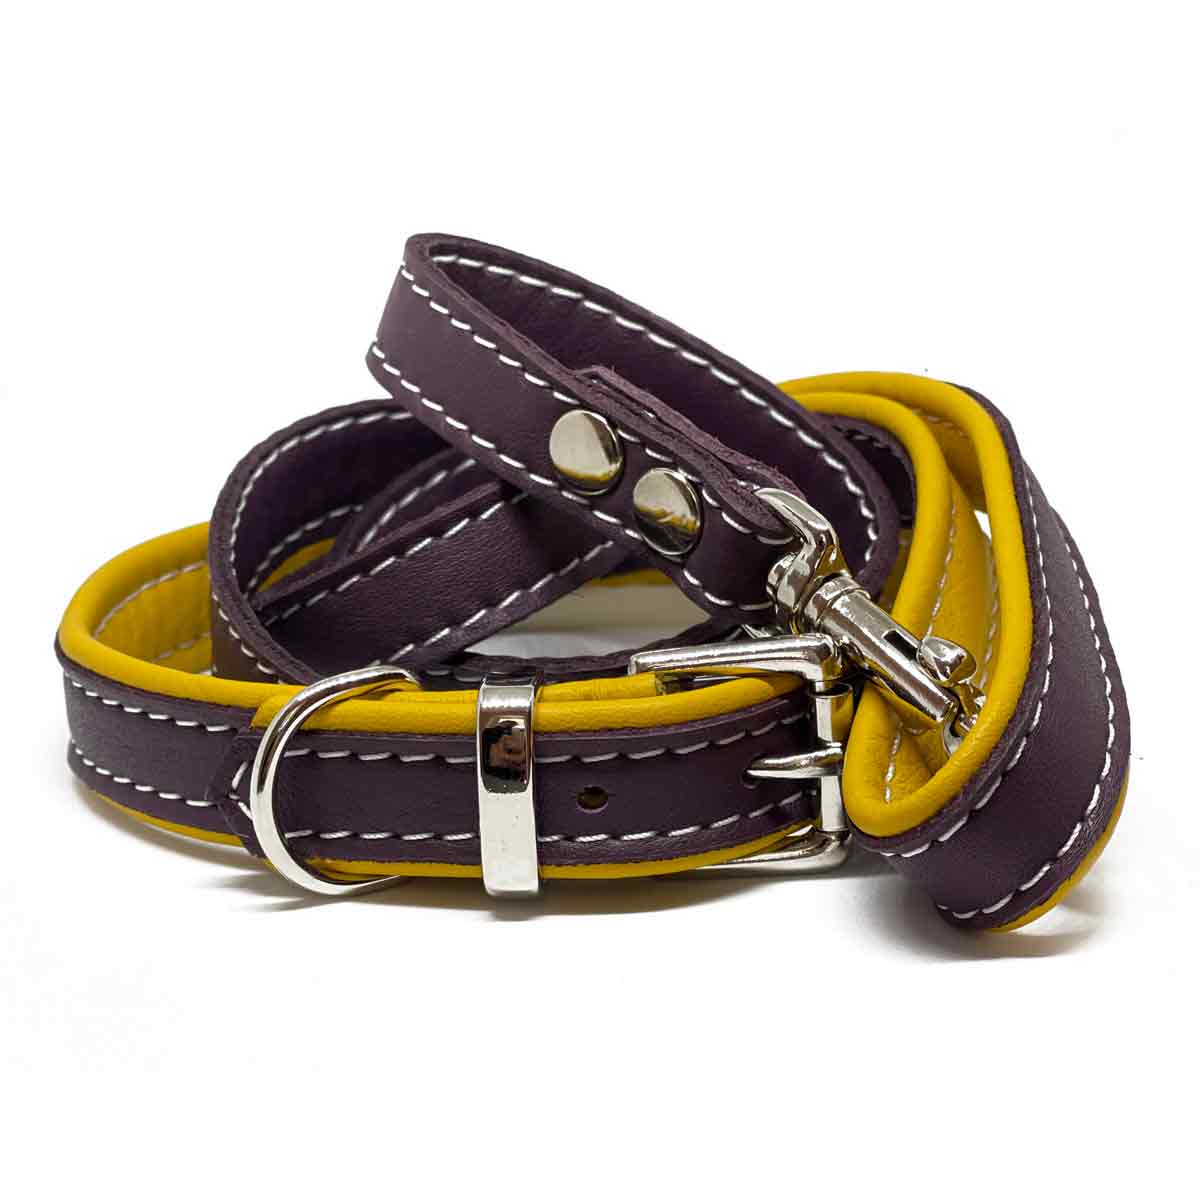 Leather puppy collars